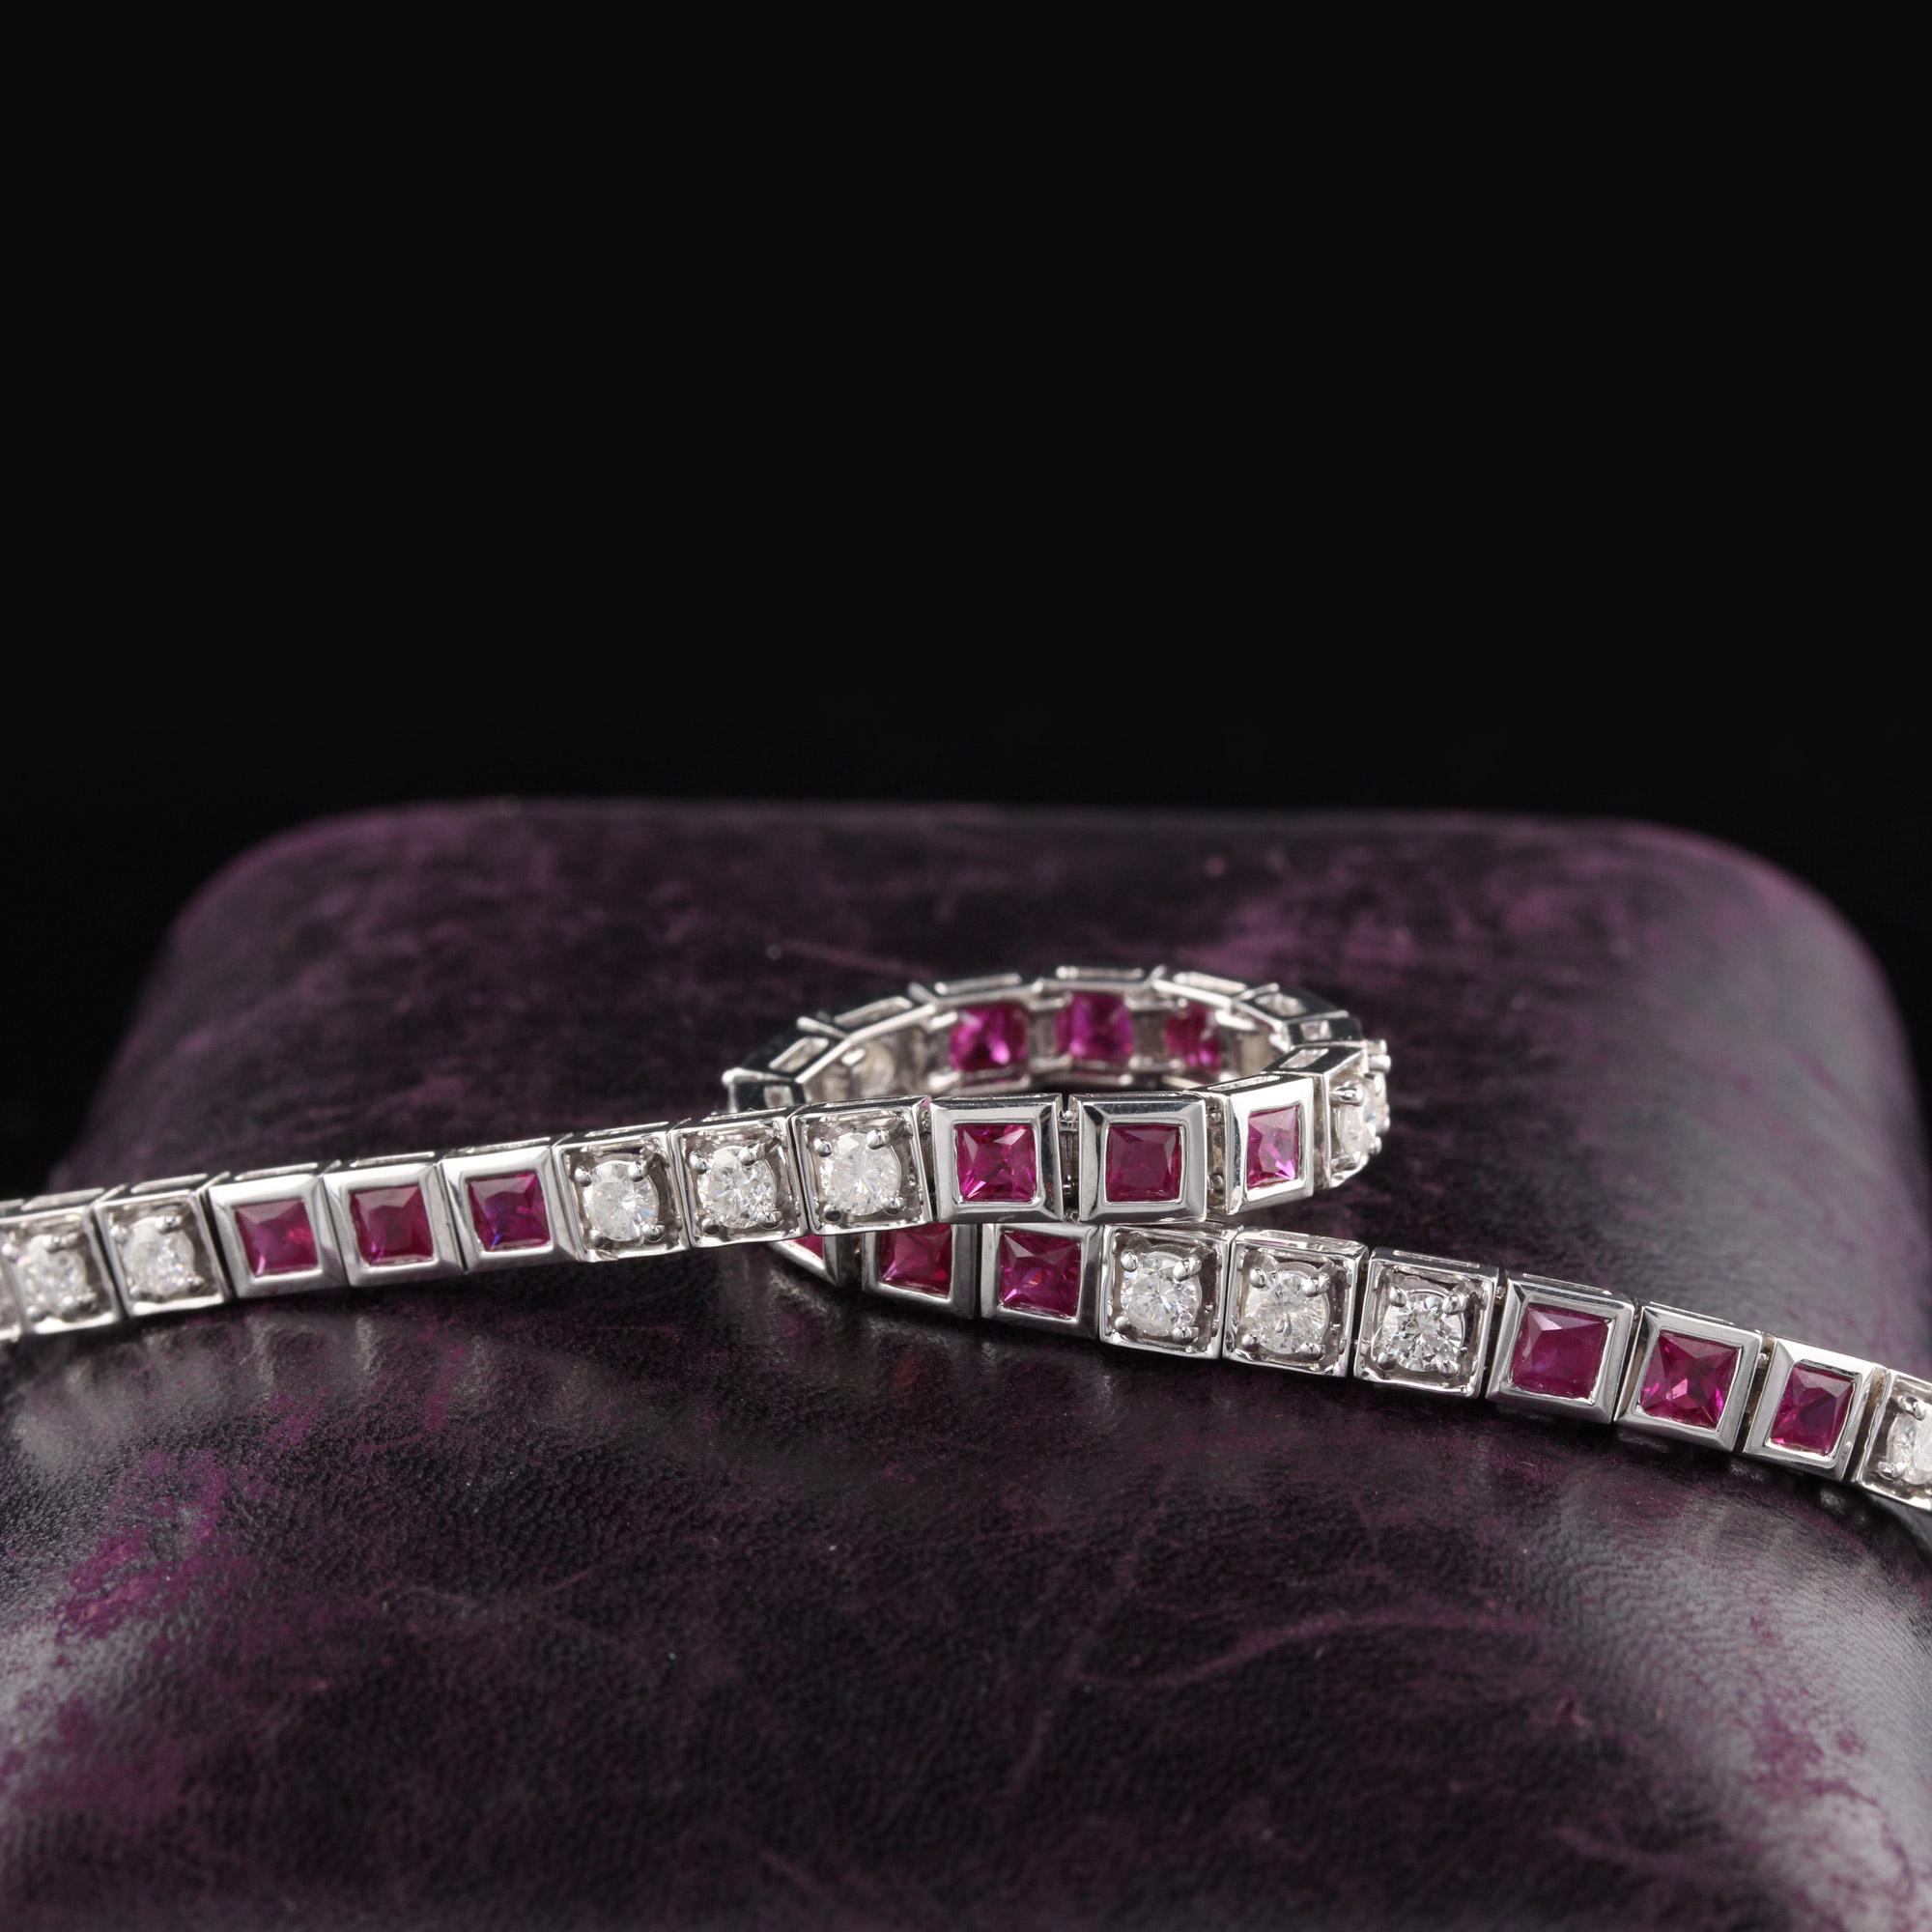 Bold and beautiful diamond and ruby bracelet set in white gold.

Metal: 18K White Gold

Weight: 19.0 Grams

Diamond Weight: Approximately 1.50 CTS

Diamond Color: H

Diamond Clarity: SI2

Ruby Total Weight: Approximately 2.50 CTS

Measurements: